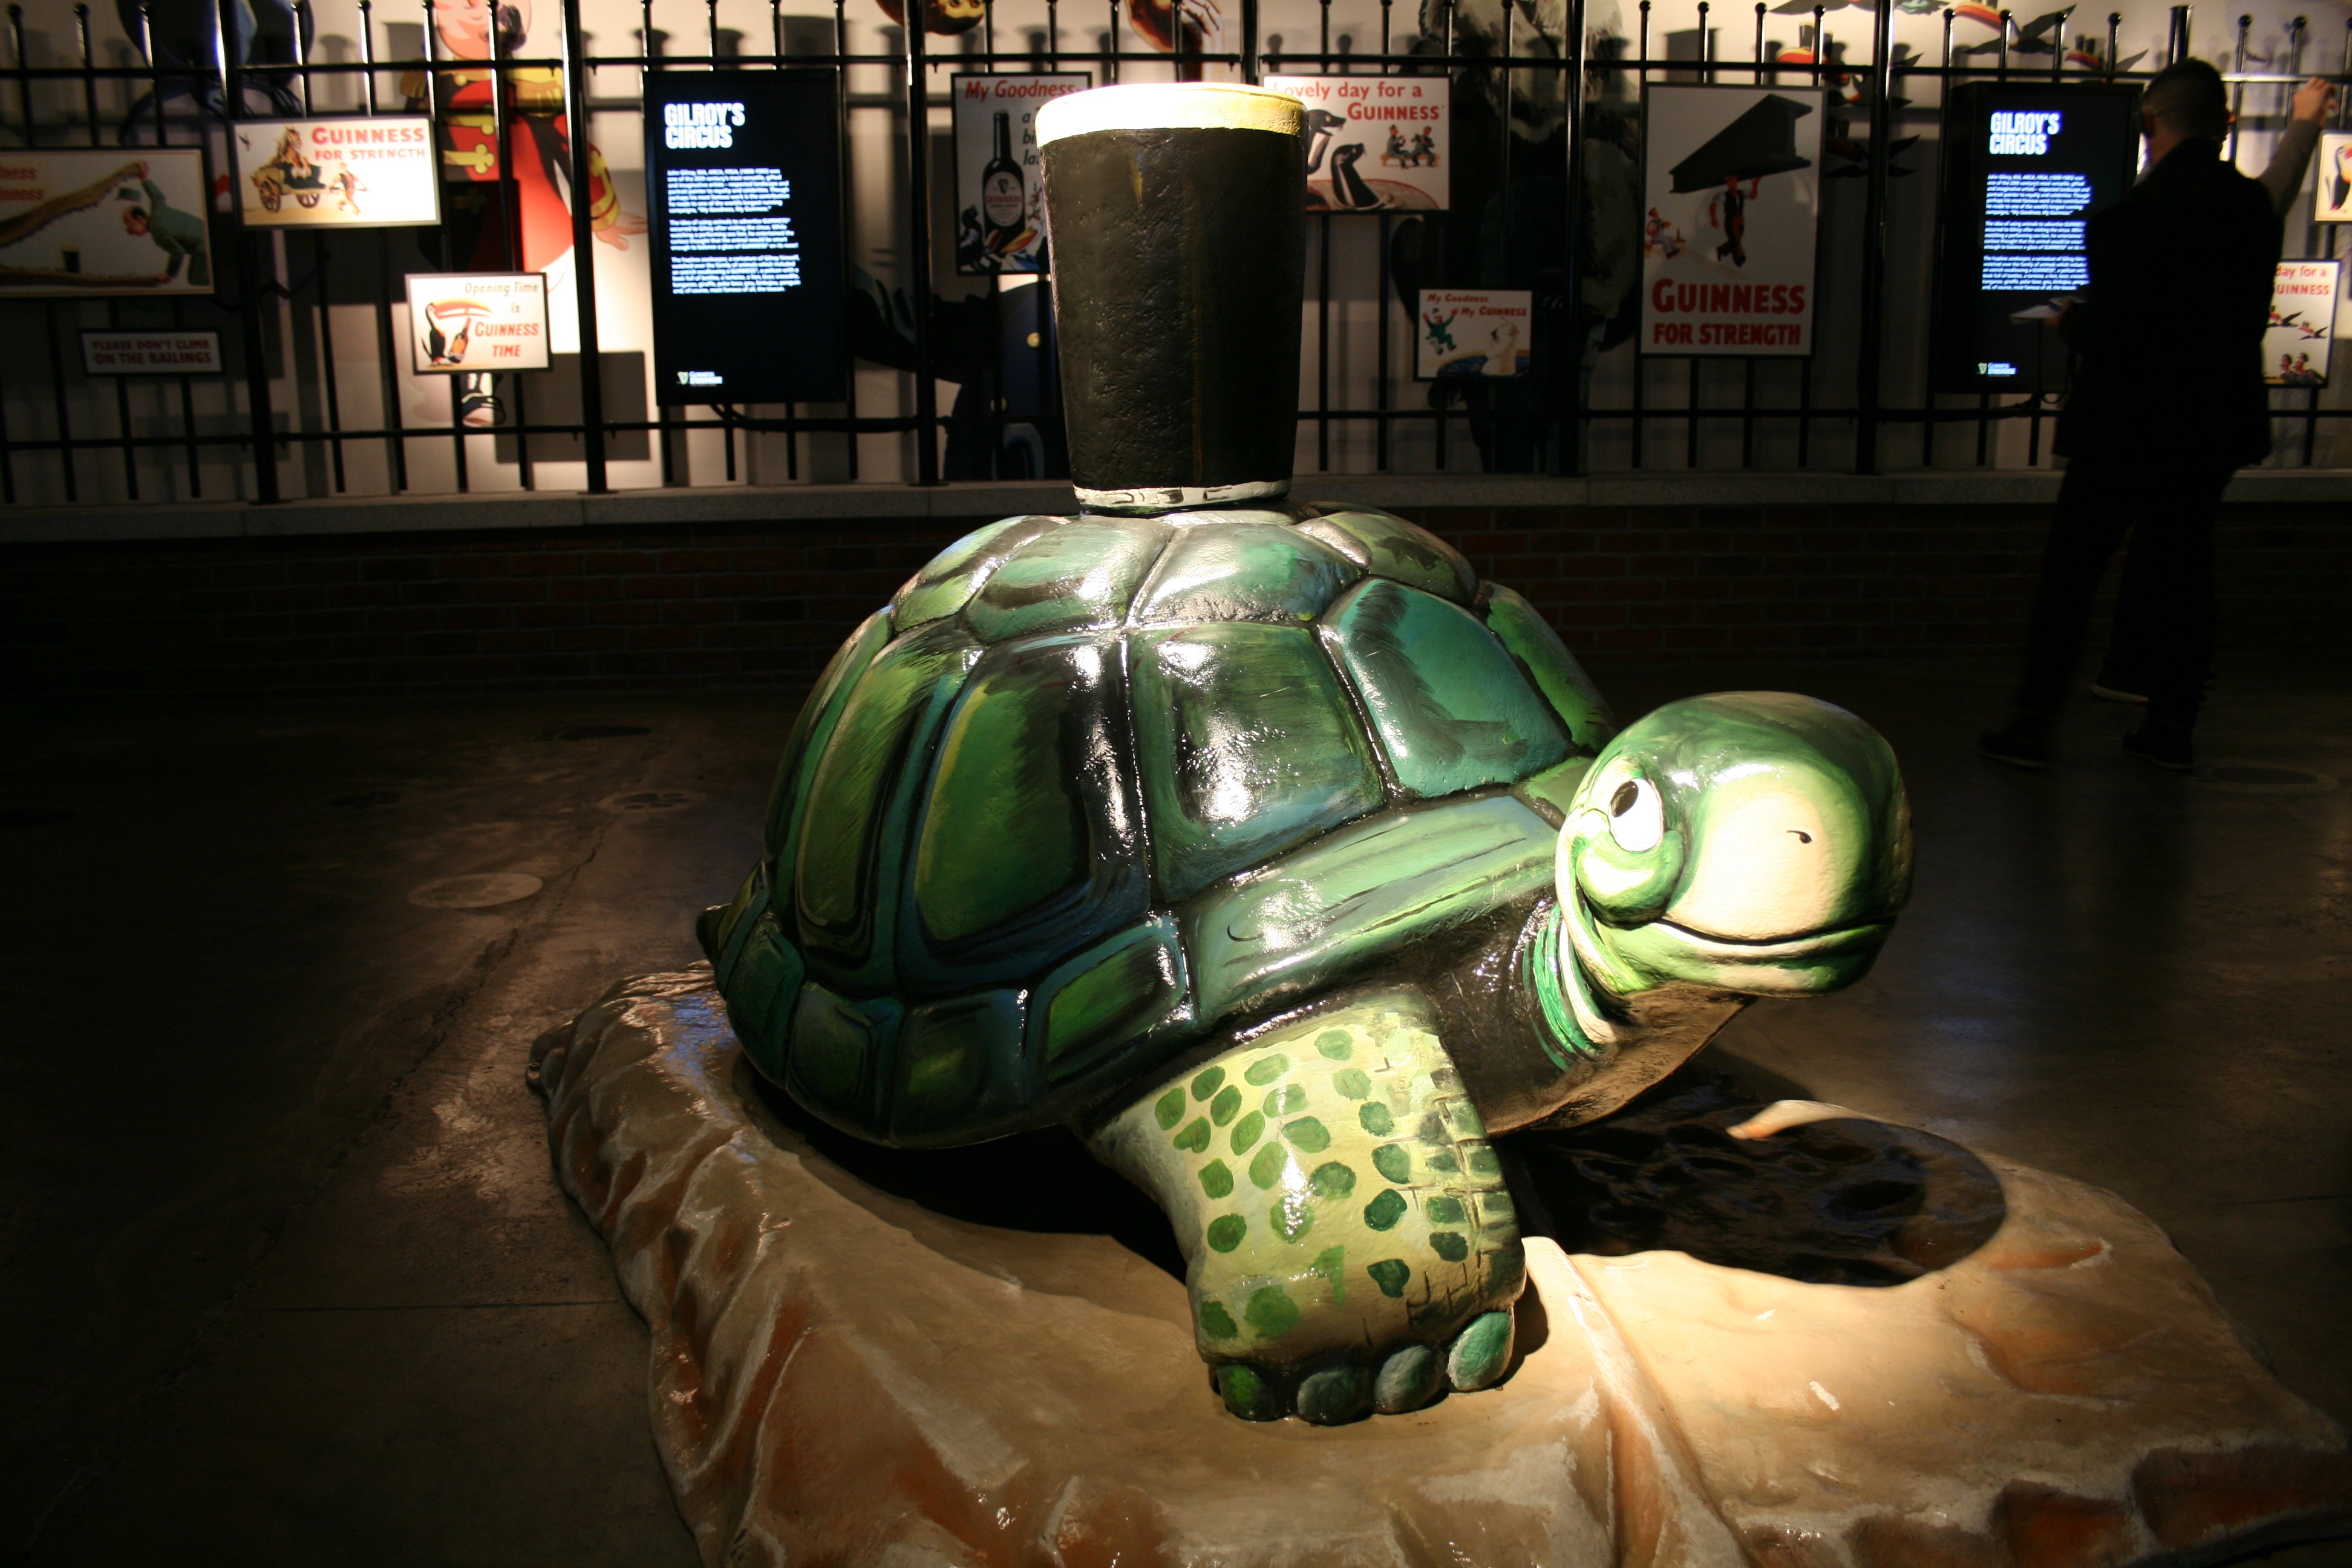 Guinness Turtle carrying a pint of Guinness created by John Gilroy.